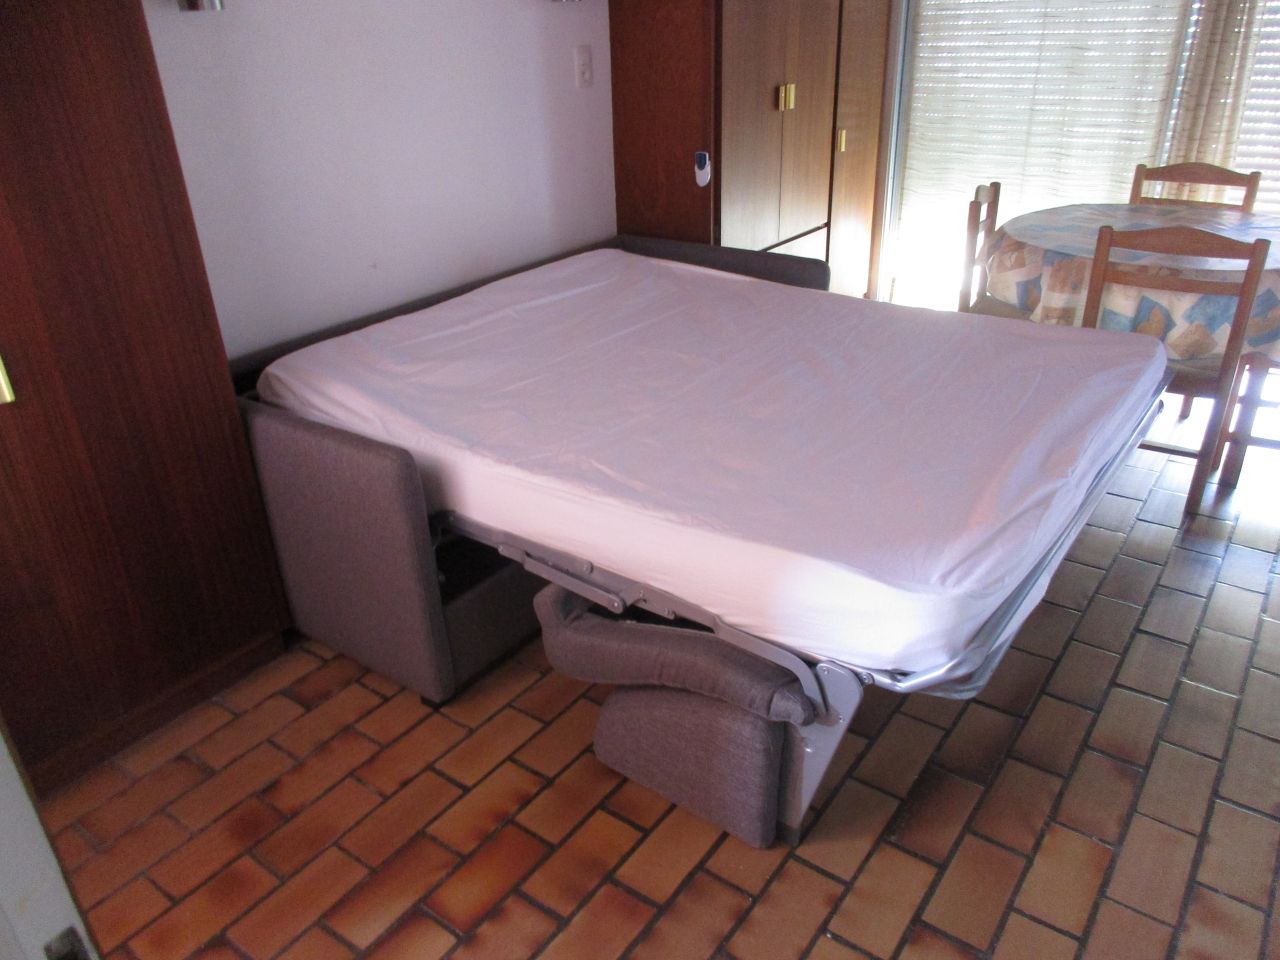 Location appartement Le Baracrs N°1122 image 3